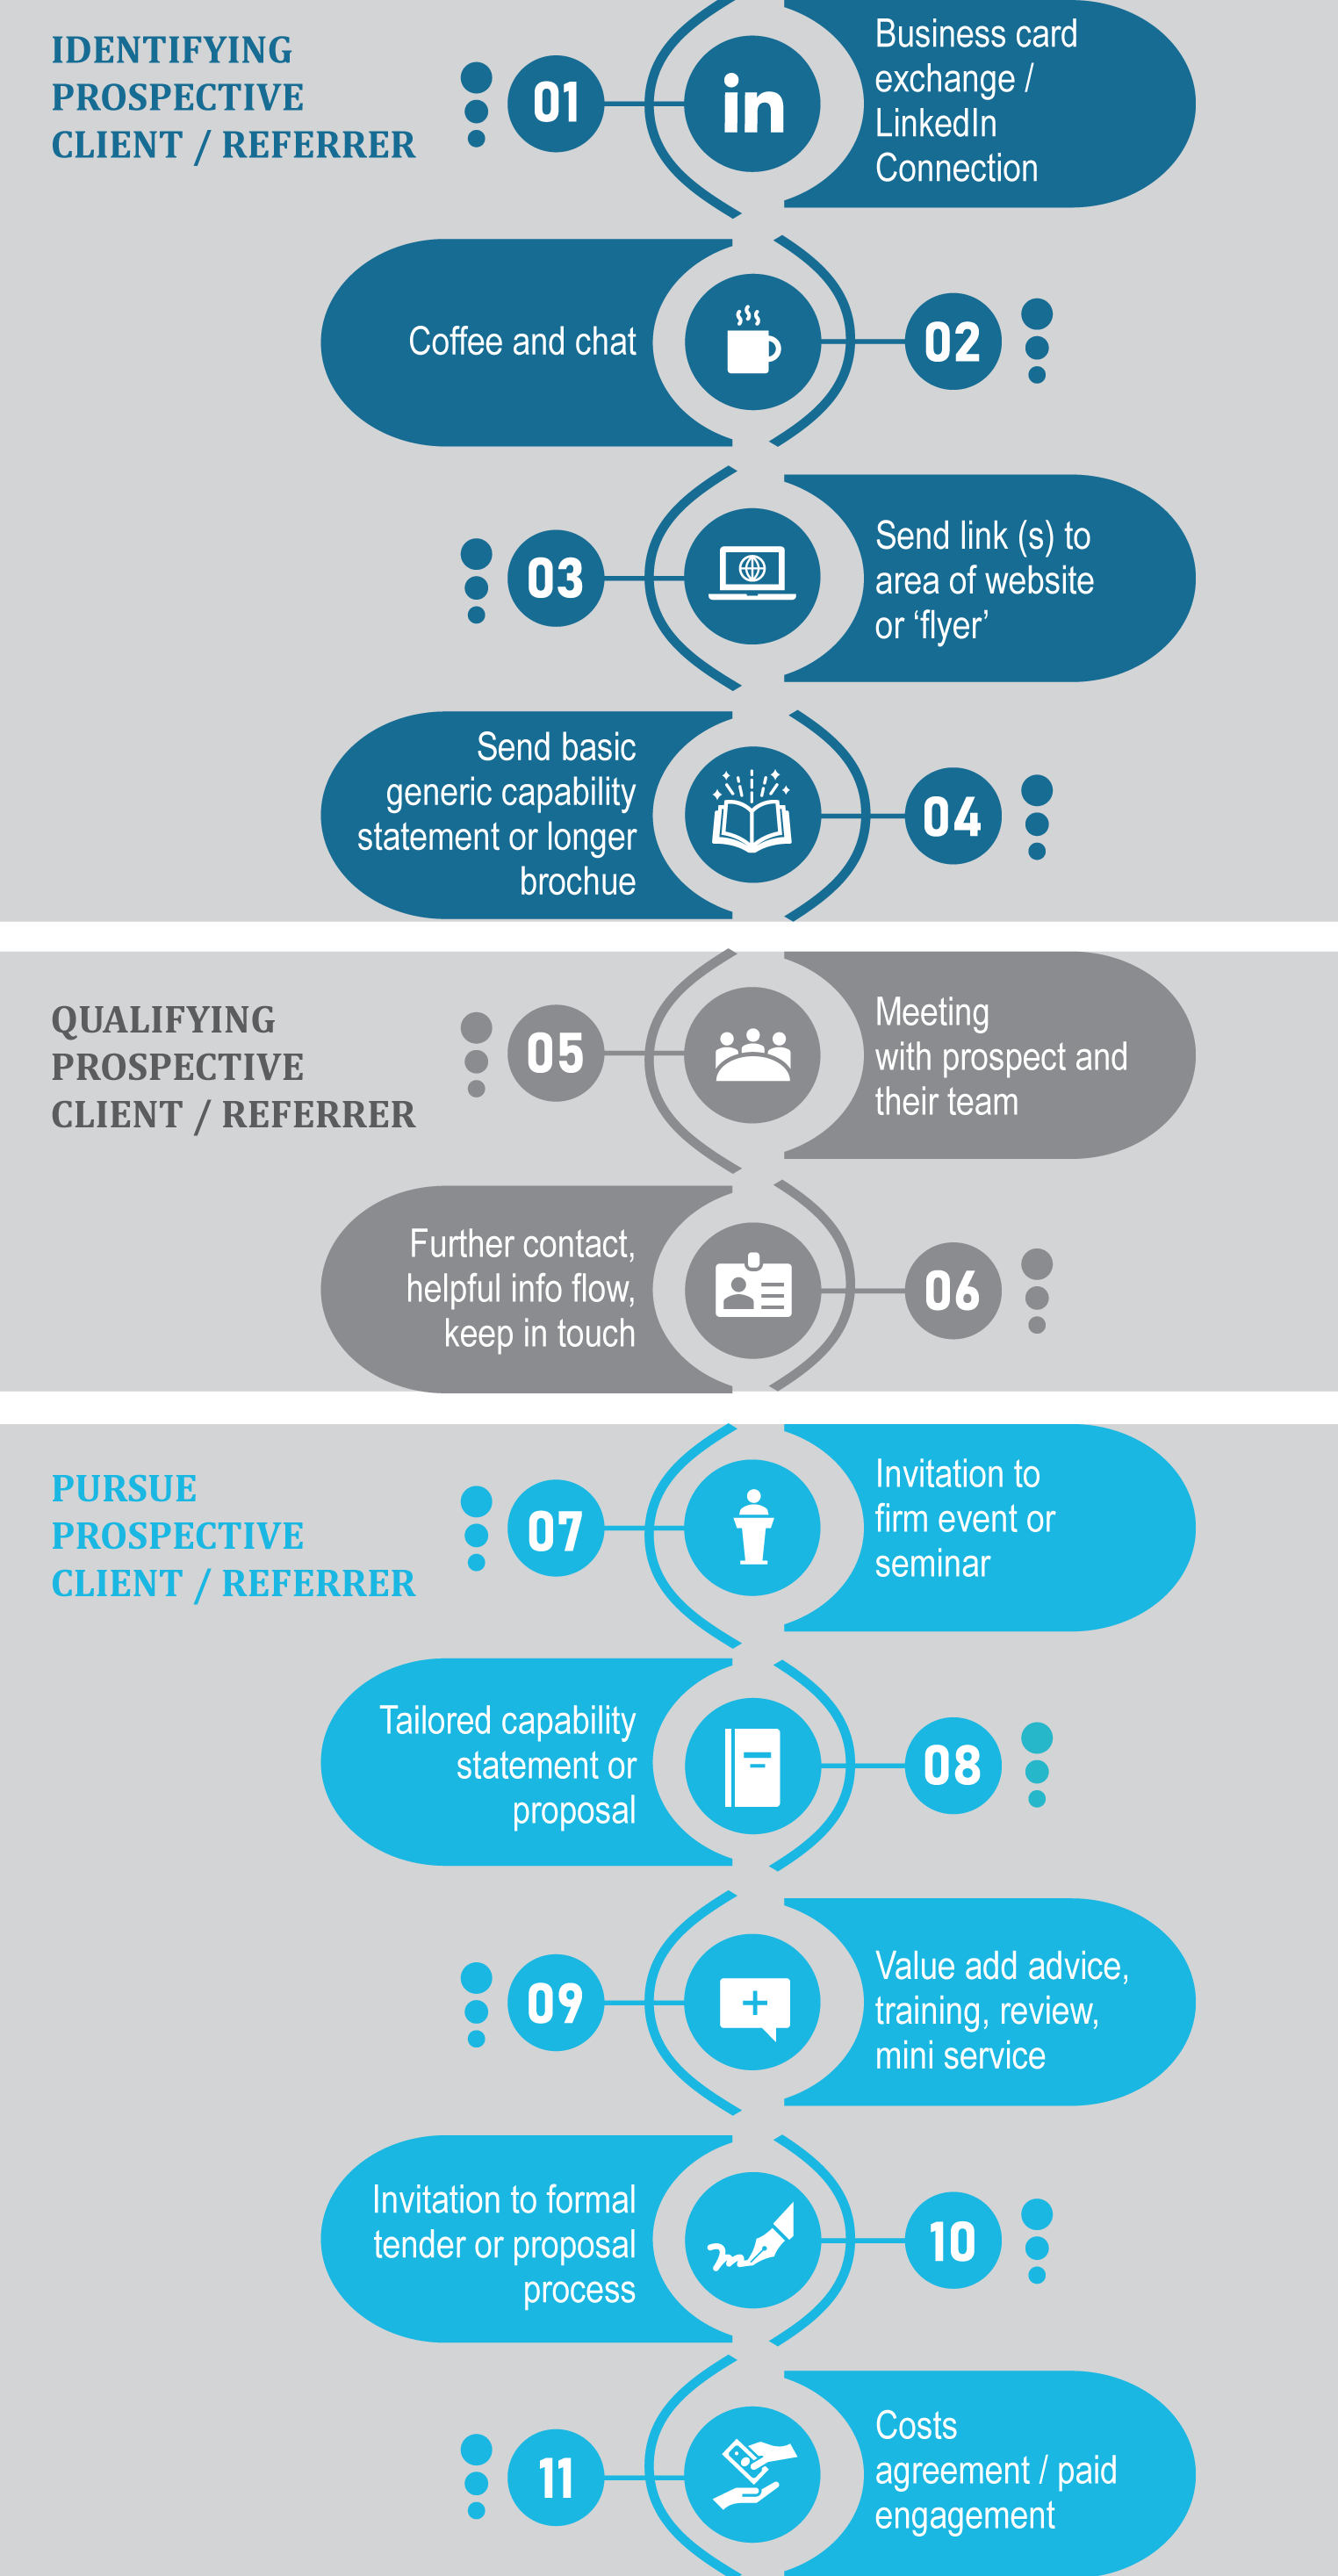 Client touchpoints - when to do a proposal on journey from prospect to paying client